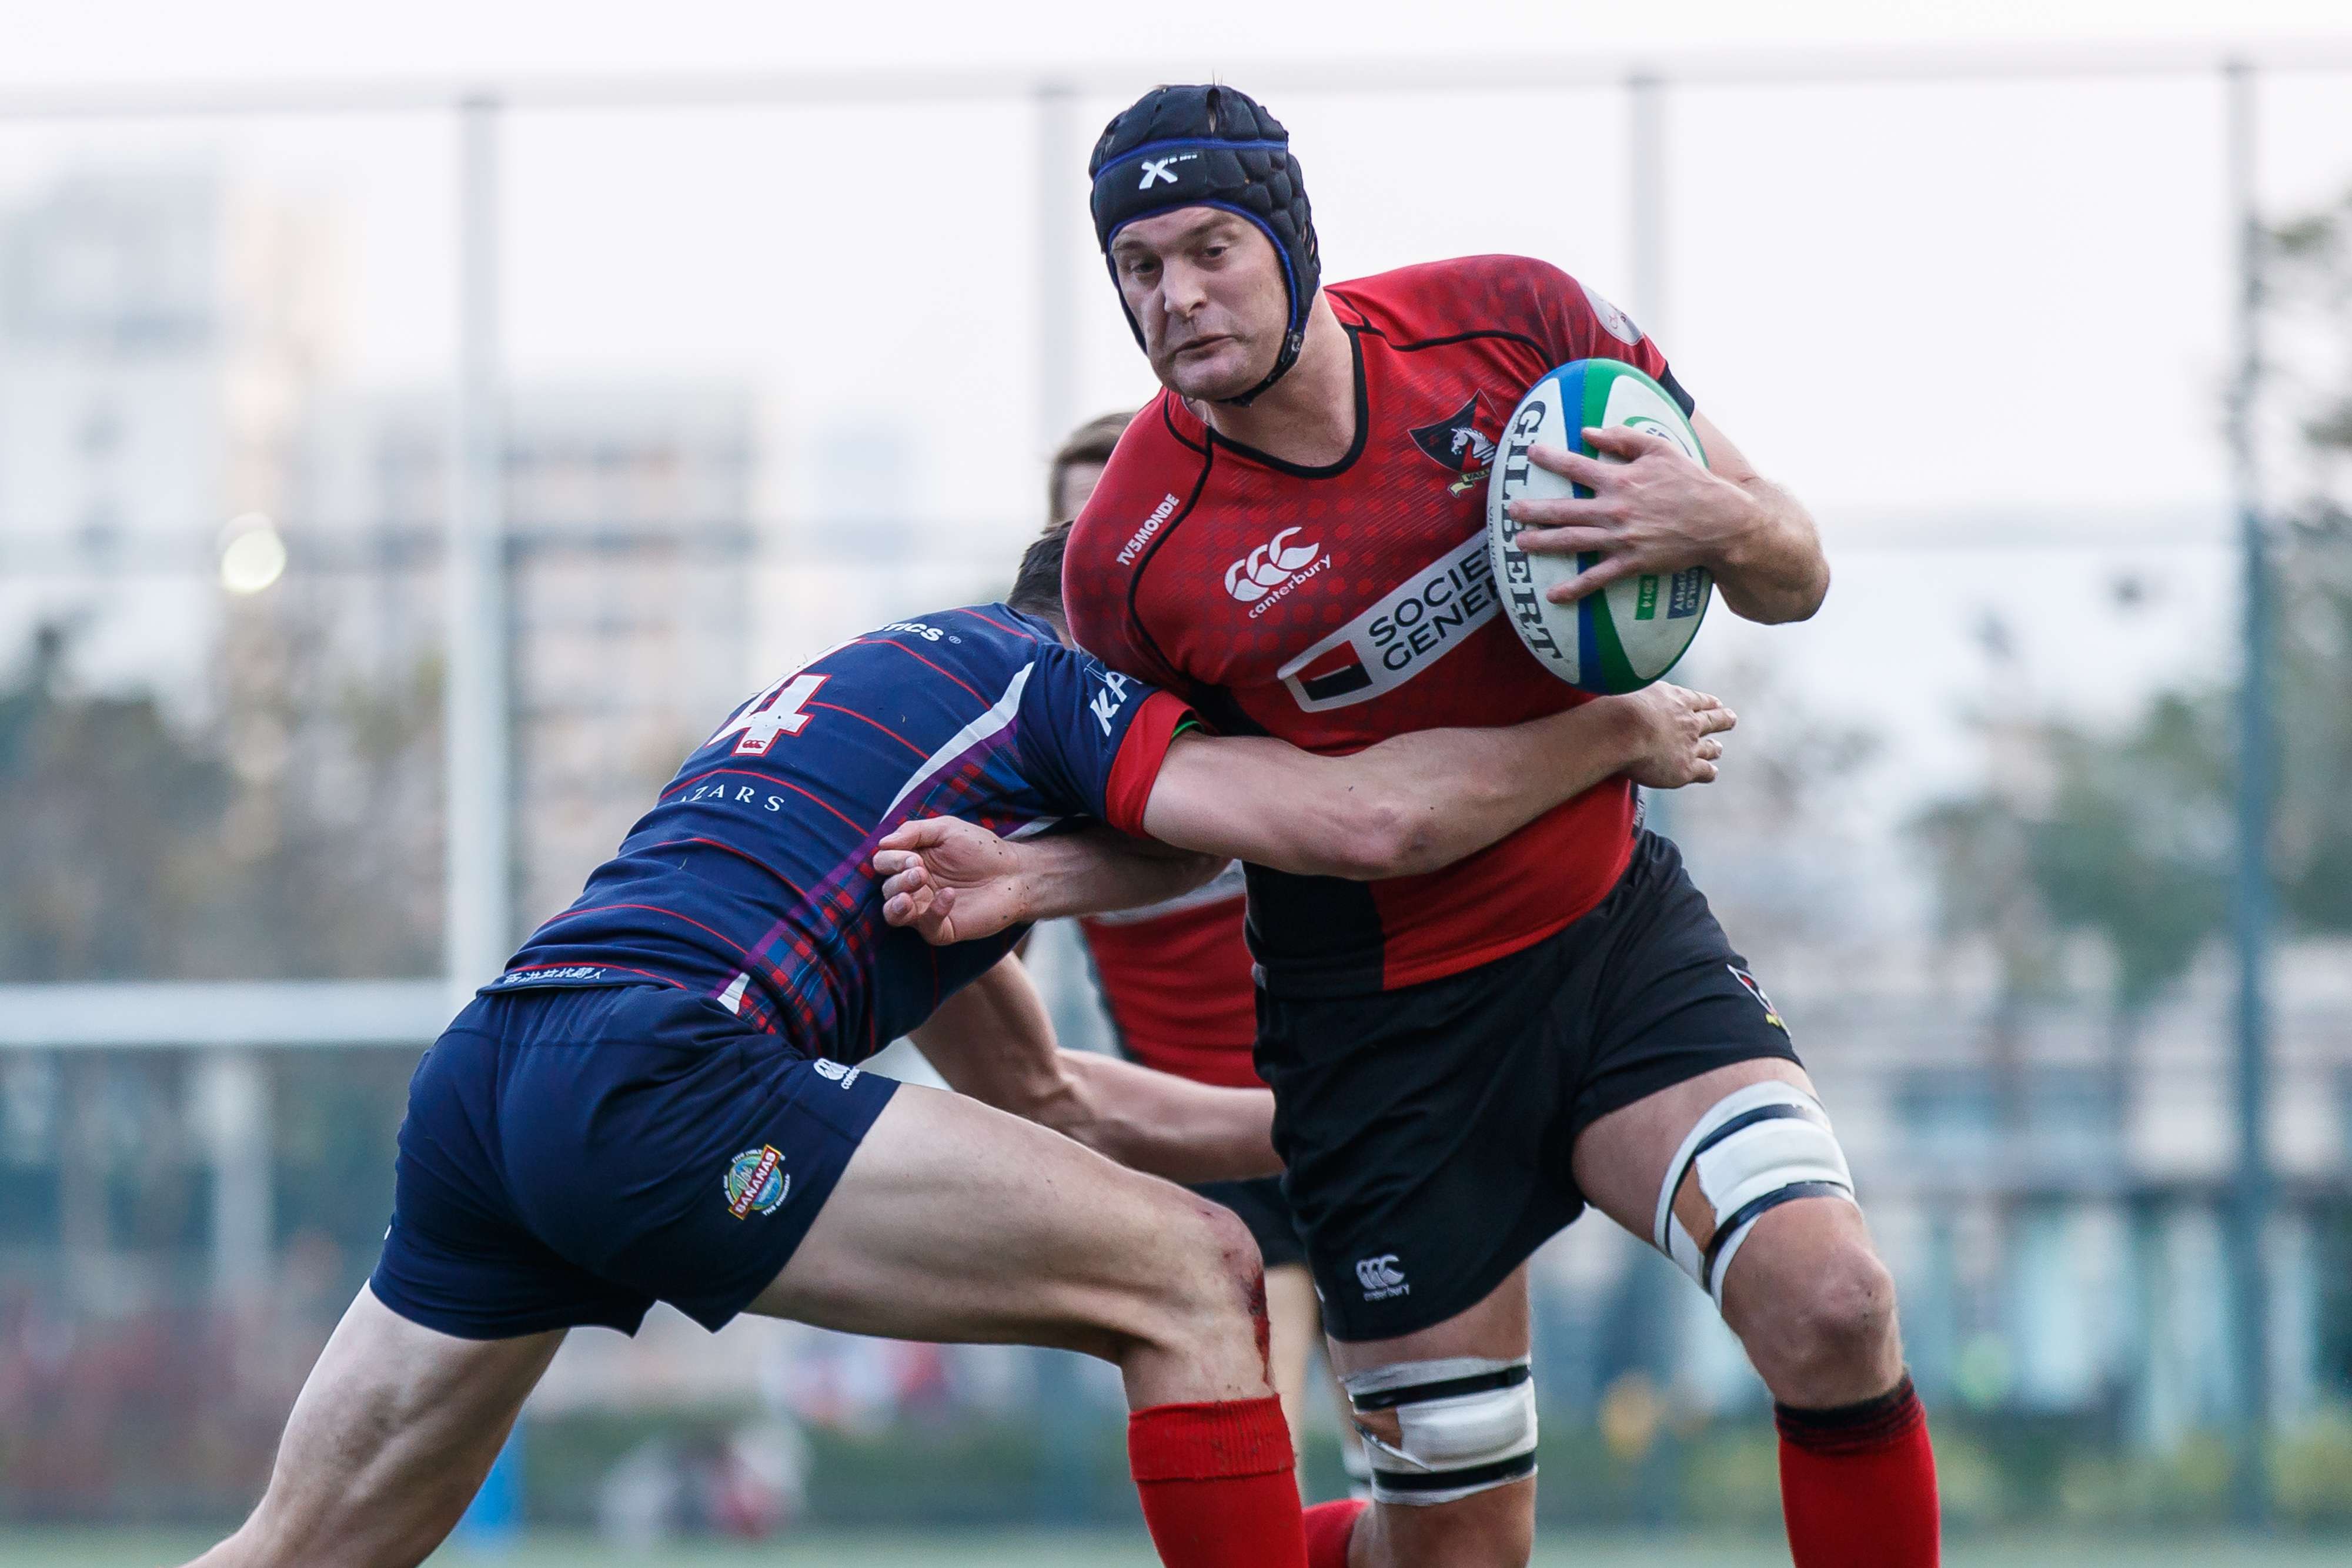 Valley co-captain Tom Broughton carries the ball during his side’s commanding 29-3 win over HK Scottish. Photos: HKRU